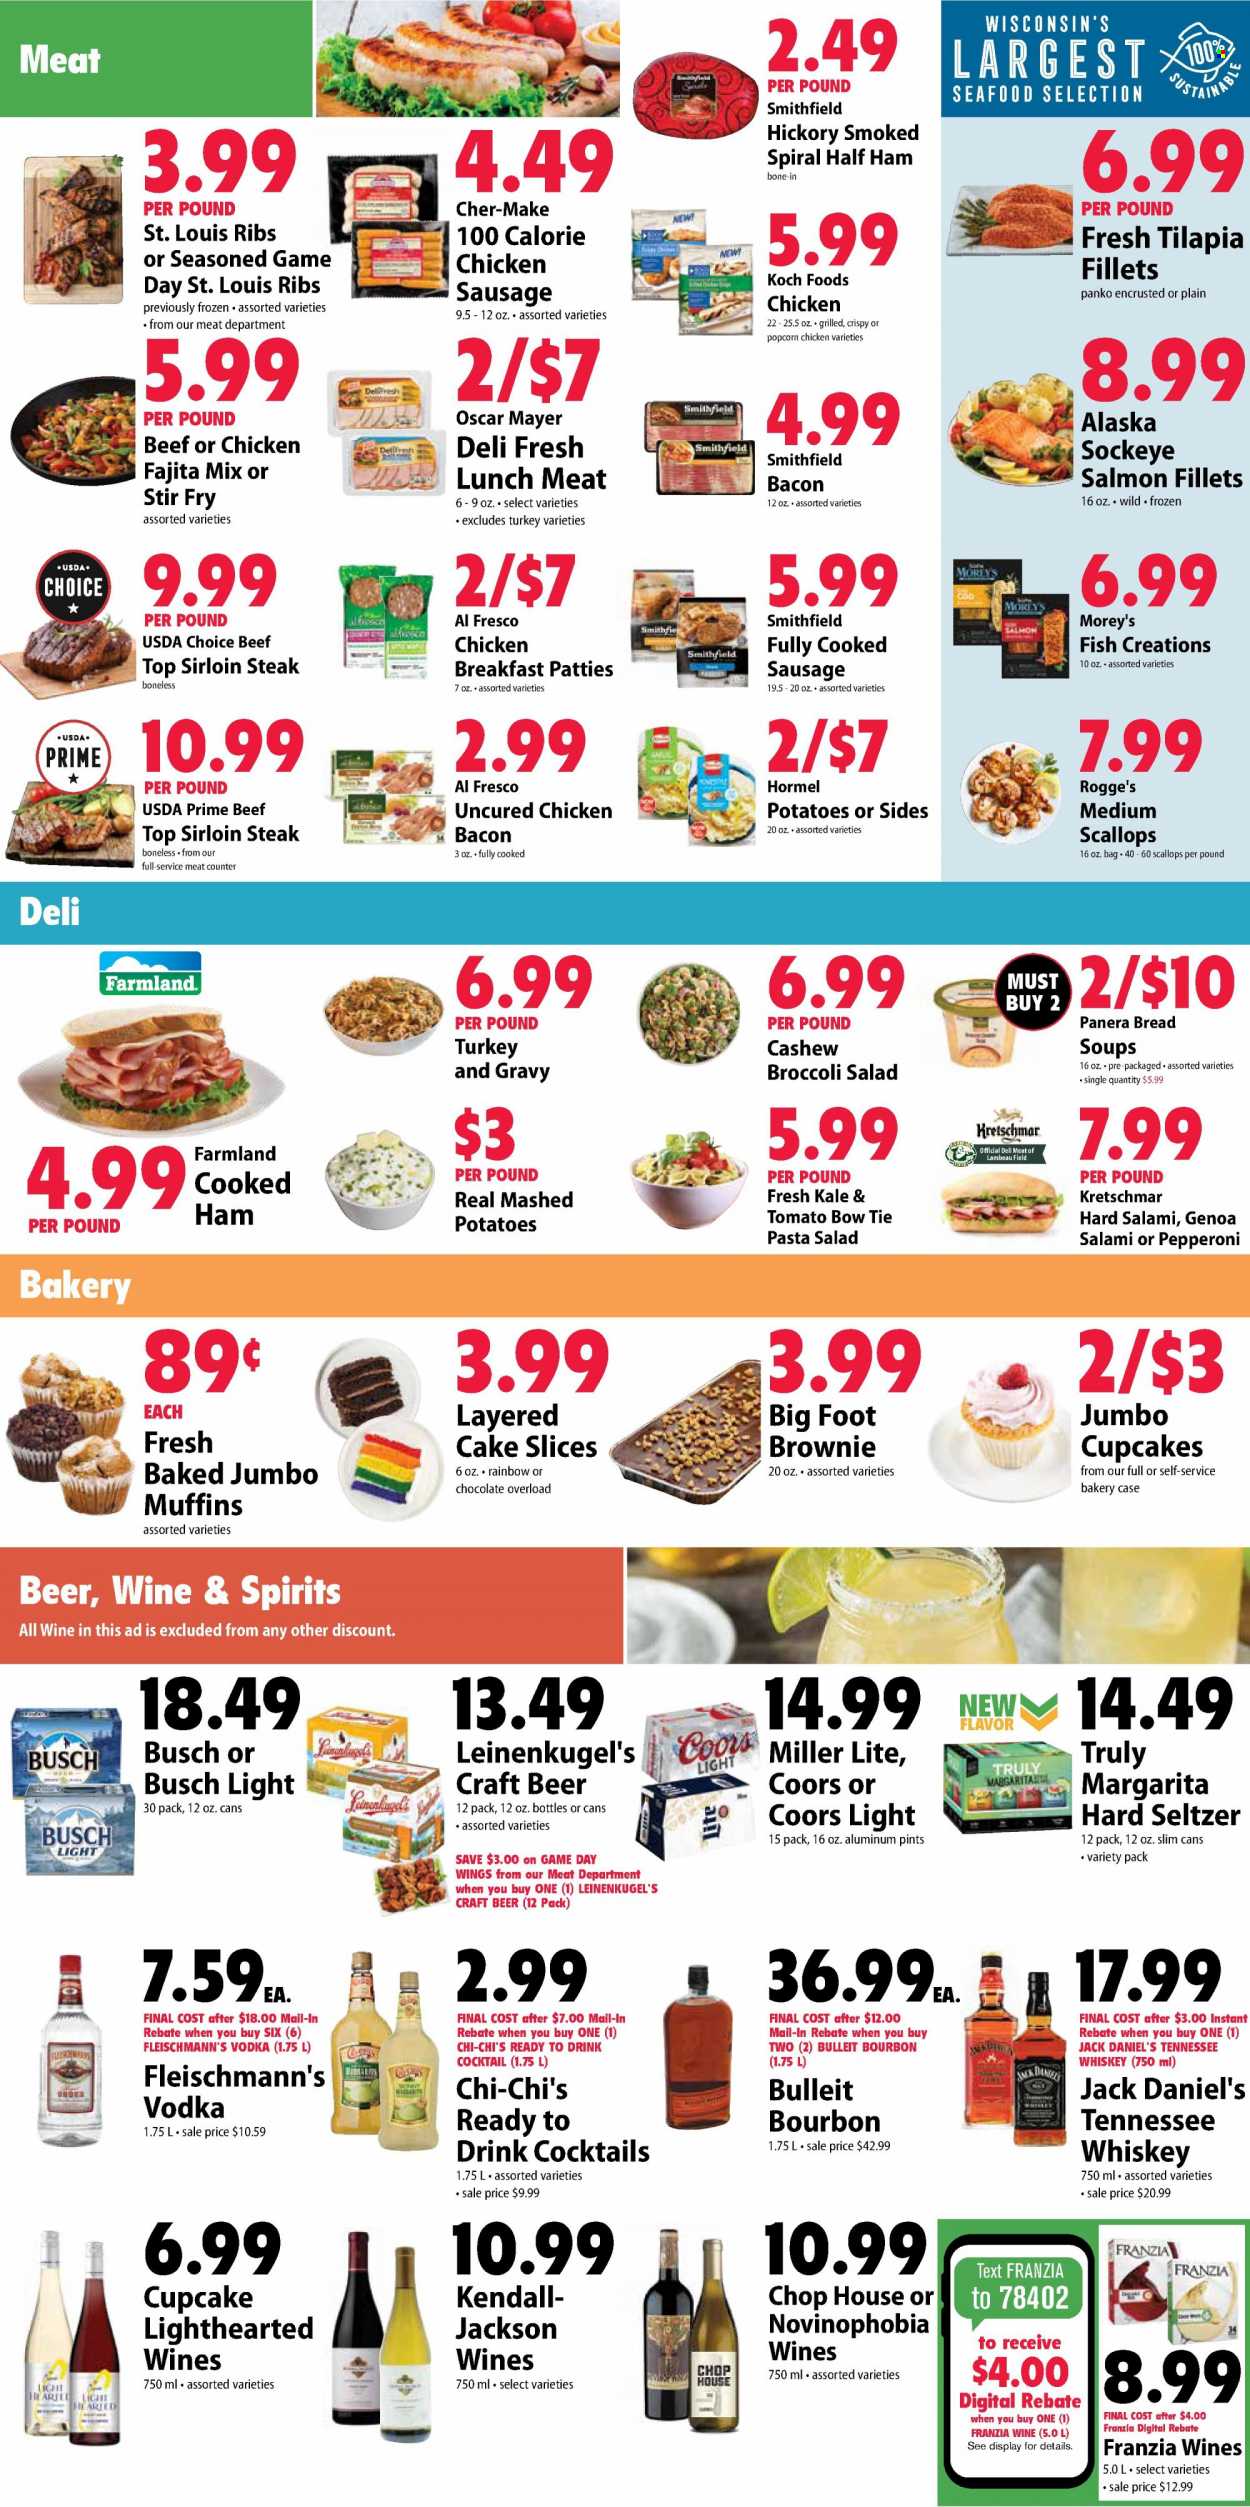 Festival Foods ad  - 01.05.2022 - 01.11.2022.